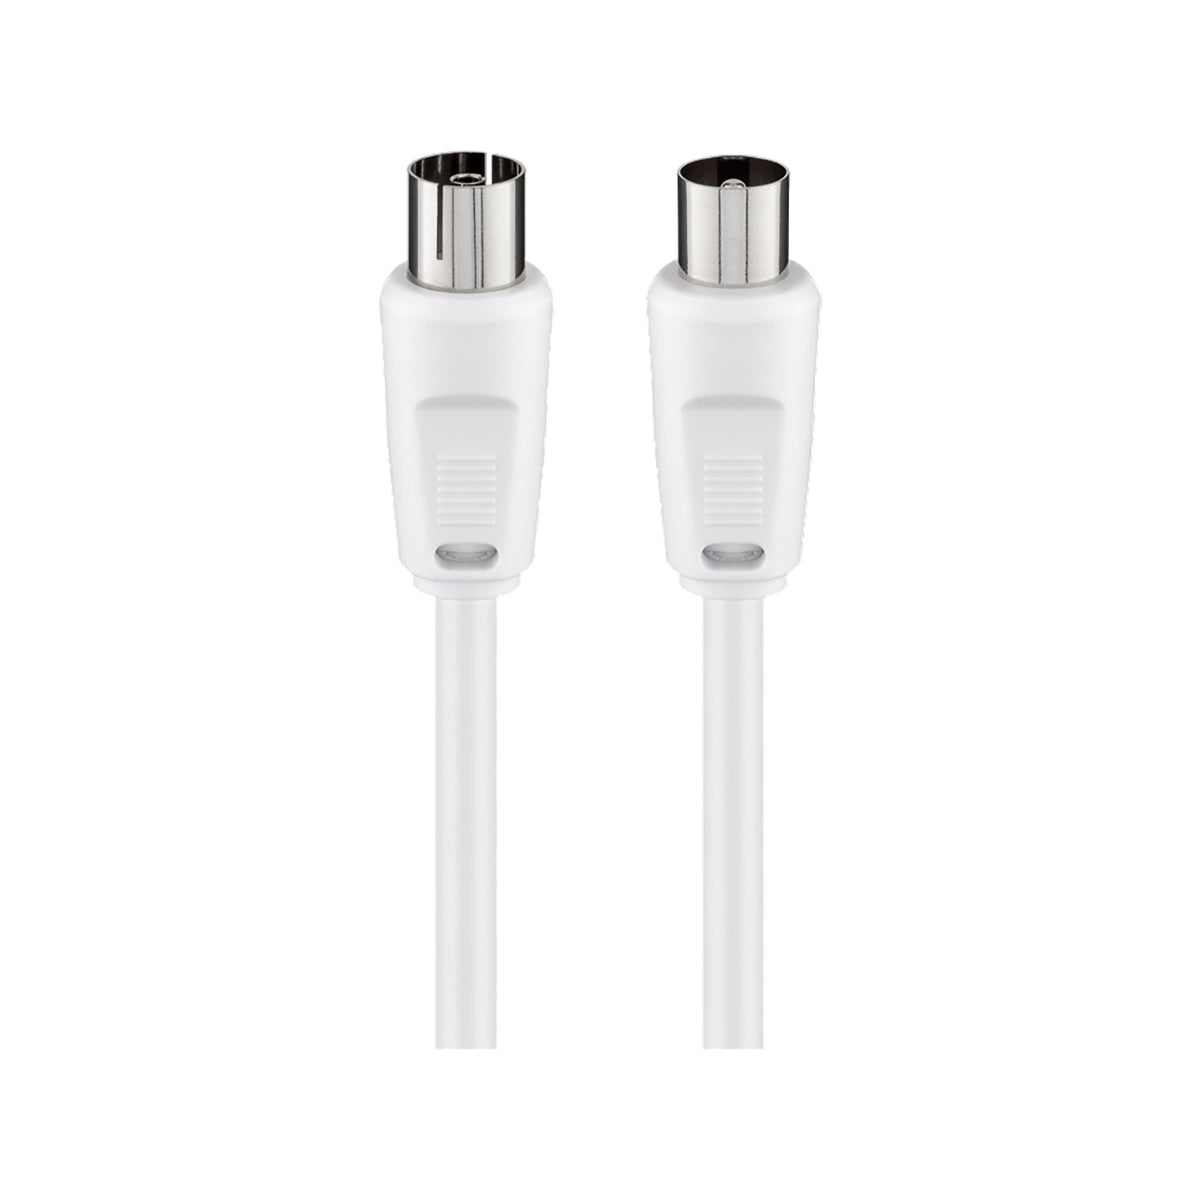 Goobay Antenna Cable (M/F) 1.5M for TV - White